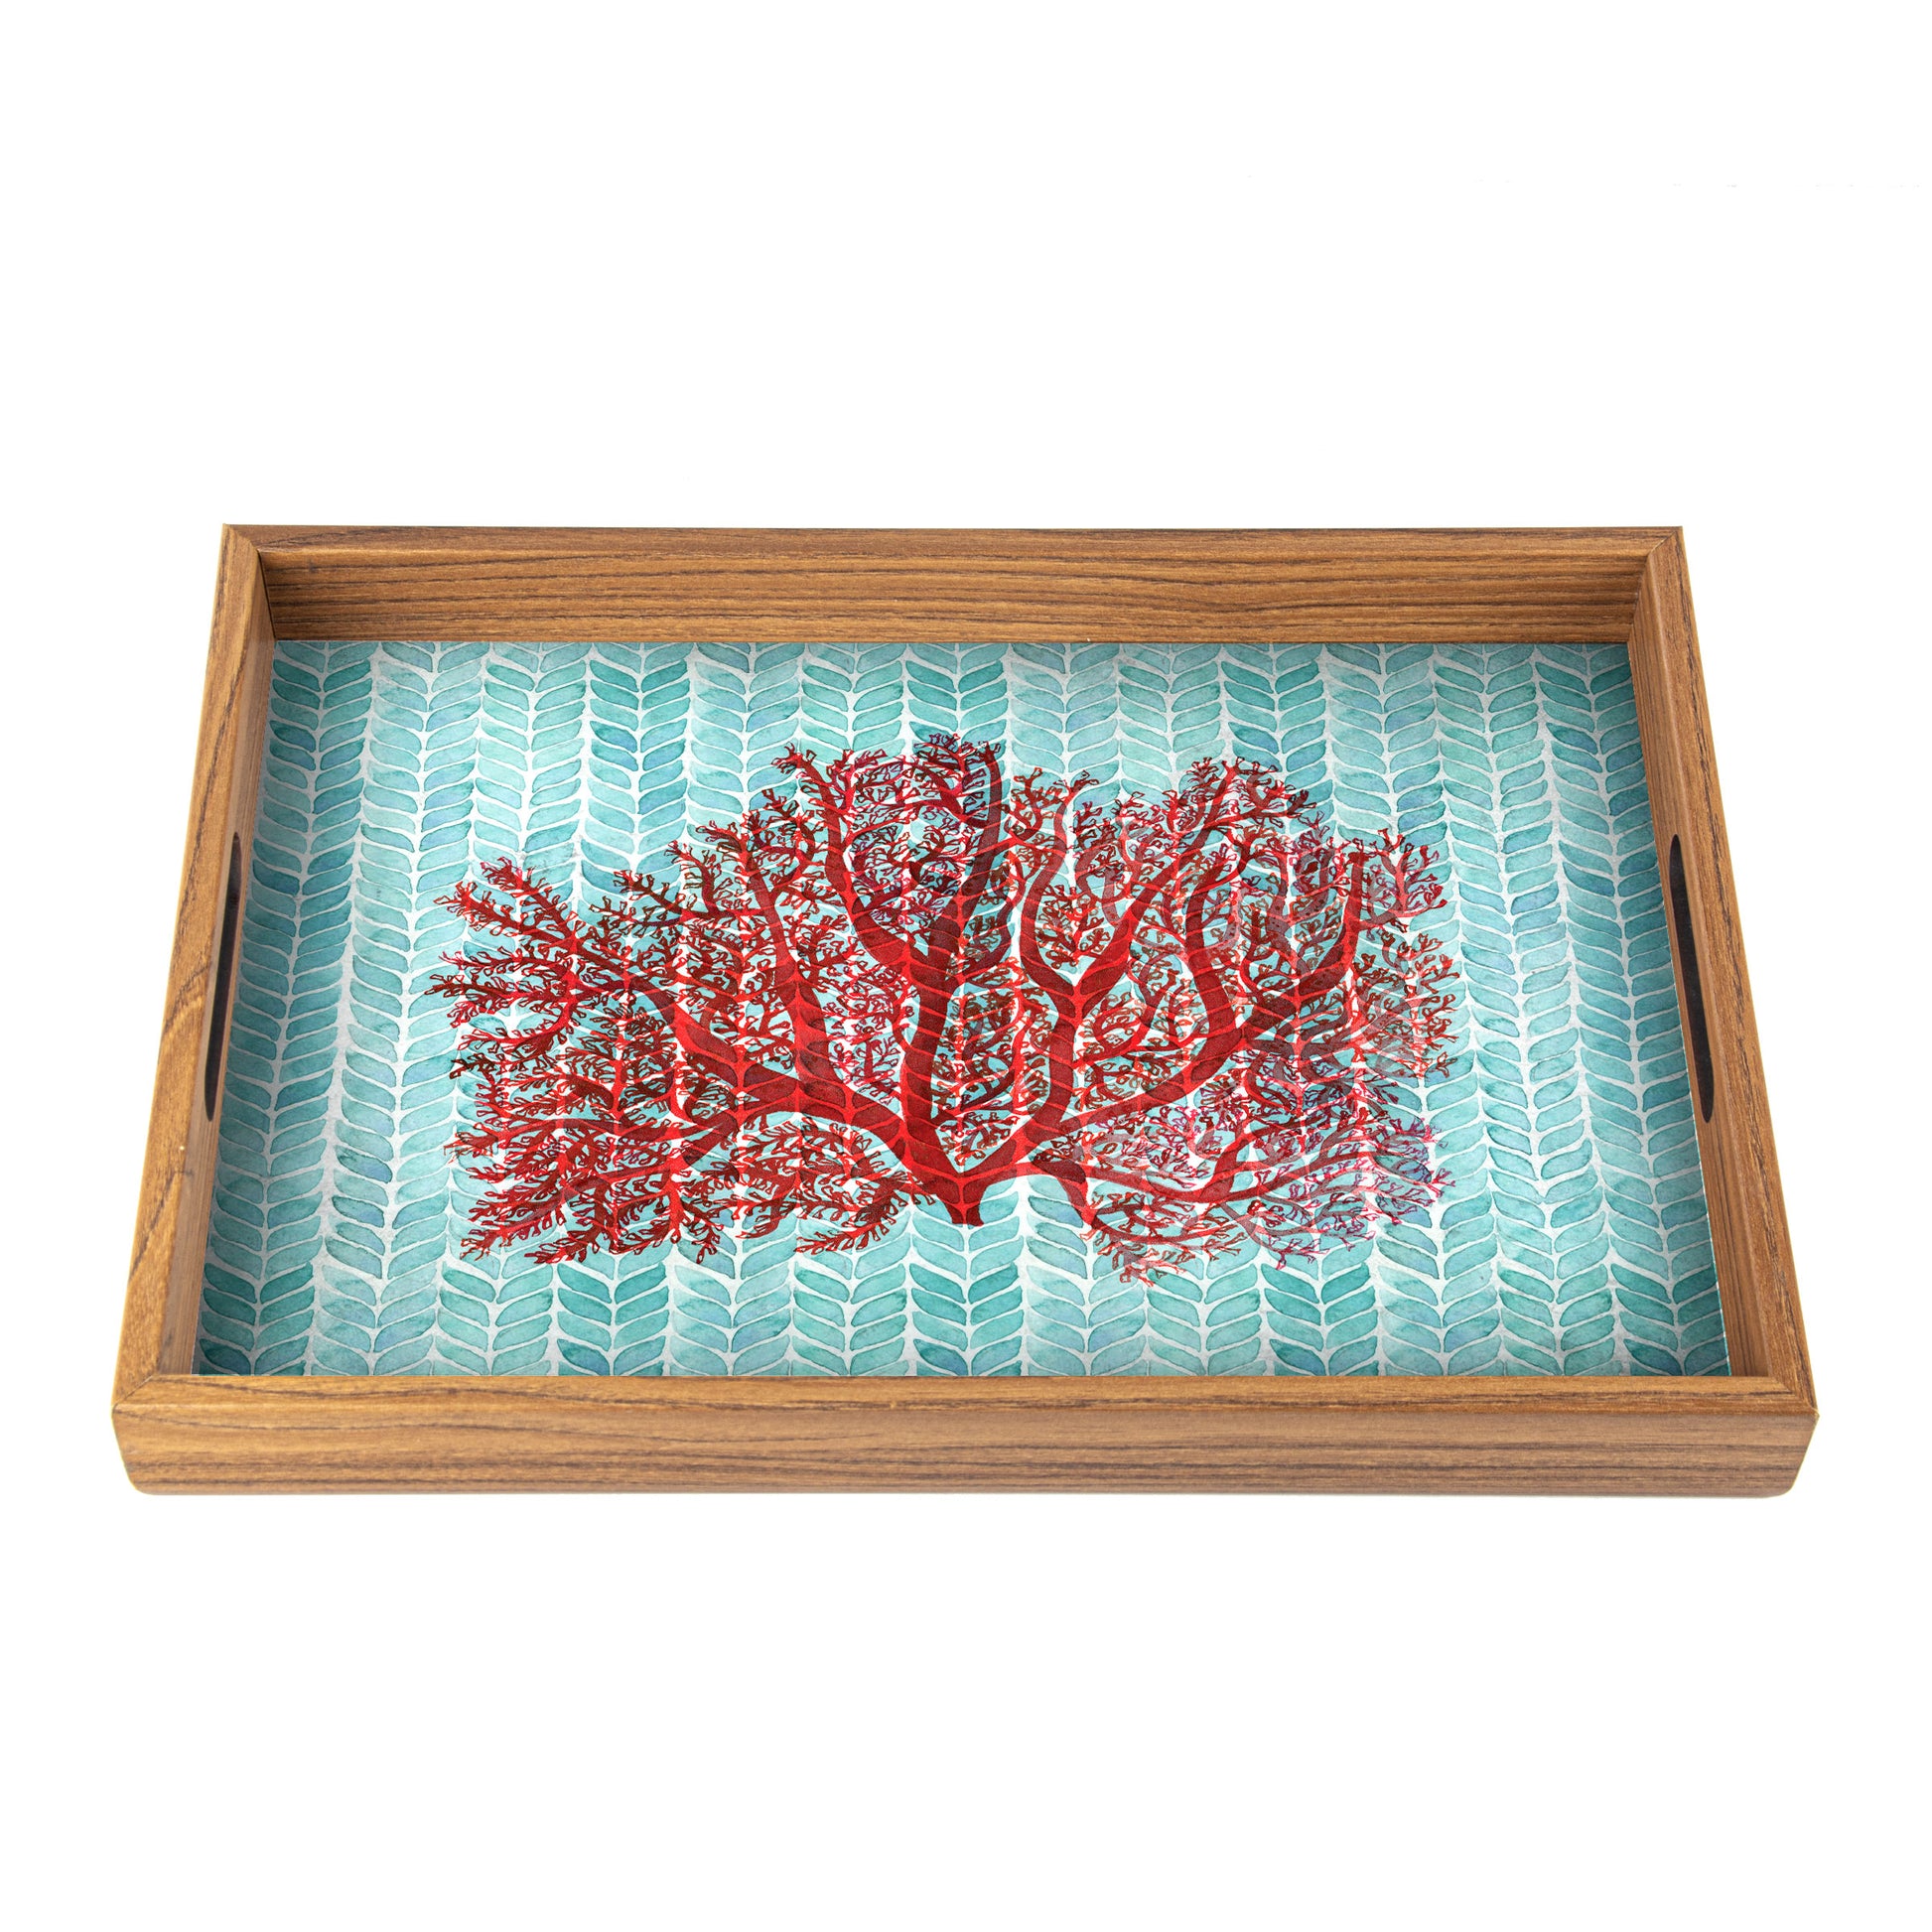 Handcrafted Wooden Tray with Coral Design - Elegant Coastal Home Decor - Premium Decorative Objects from MANOPOULOS Chess & Backgammon - Just €25! Shop now at MANOPOULOS Chess & Backgammon